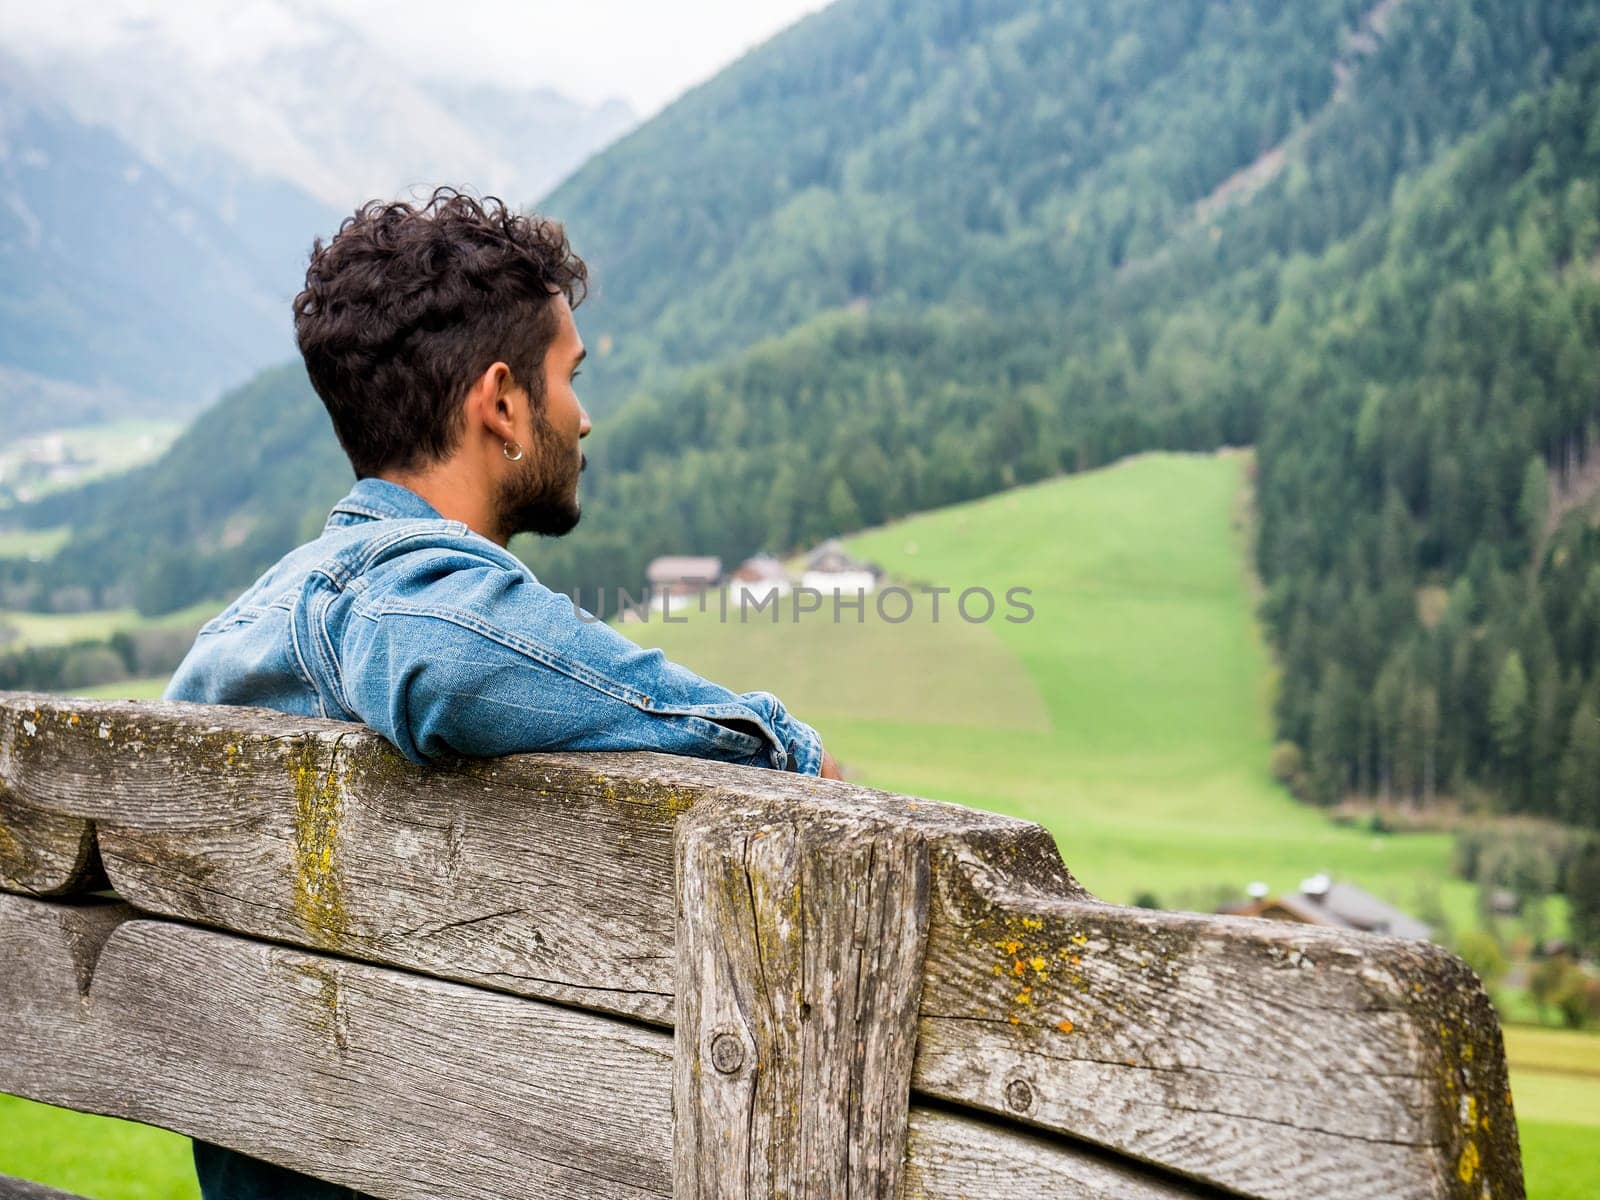 A man sitting on a wooden bench overlooking a valley. Photo of a man enjoying the scenic view from a rustic wooden bench in the valley